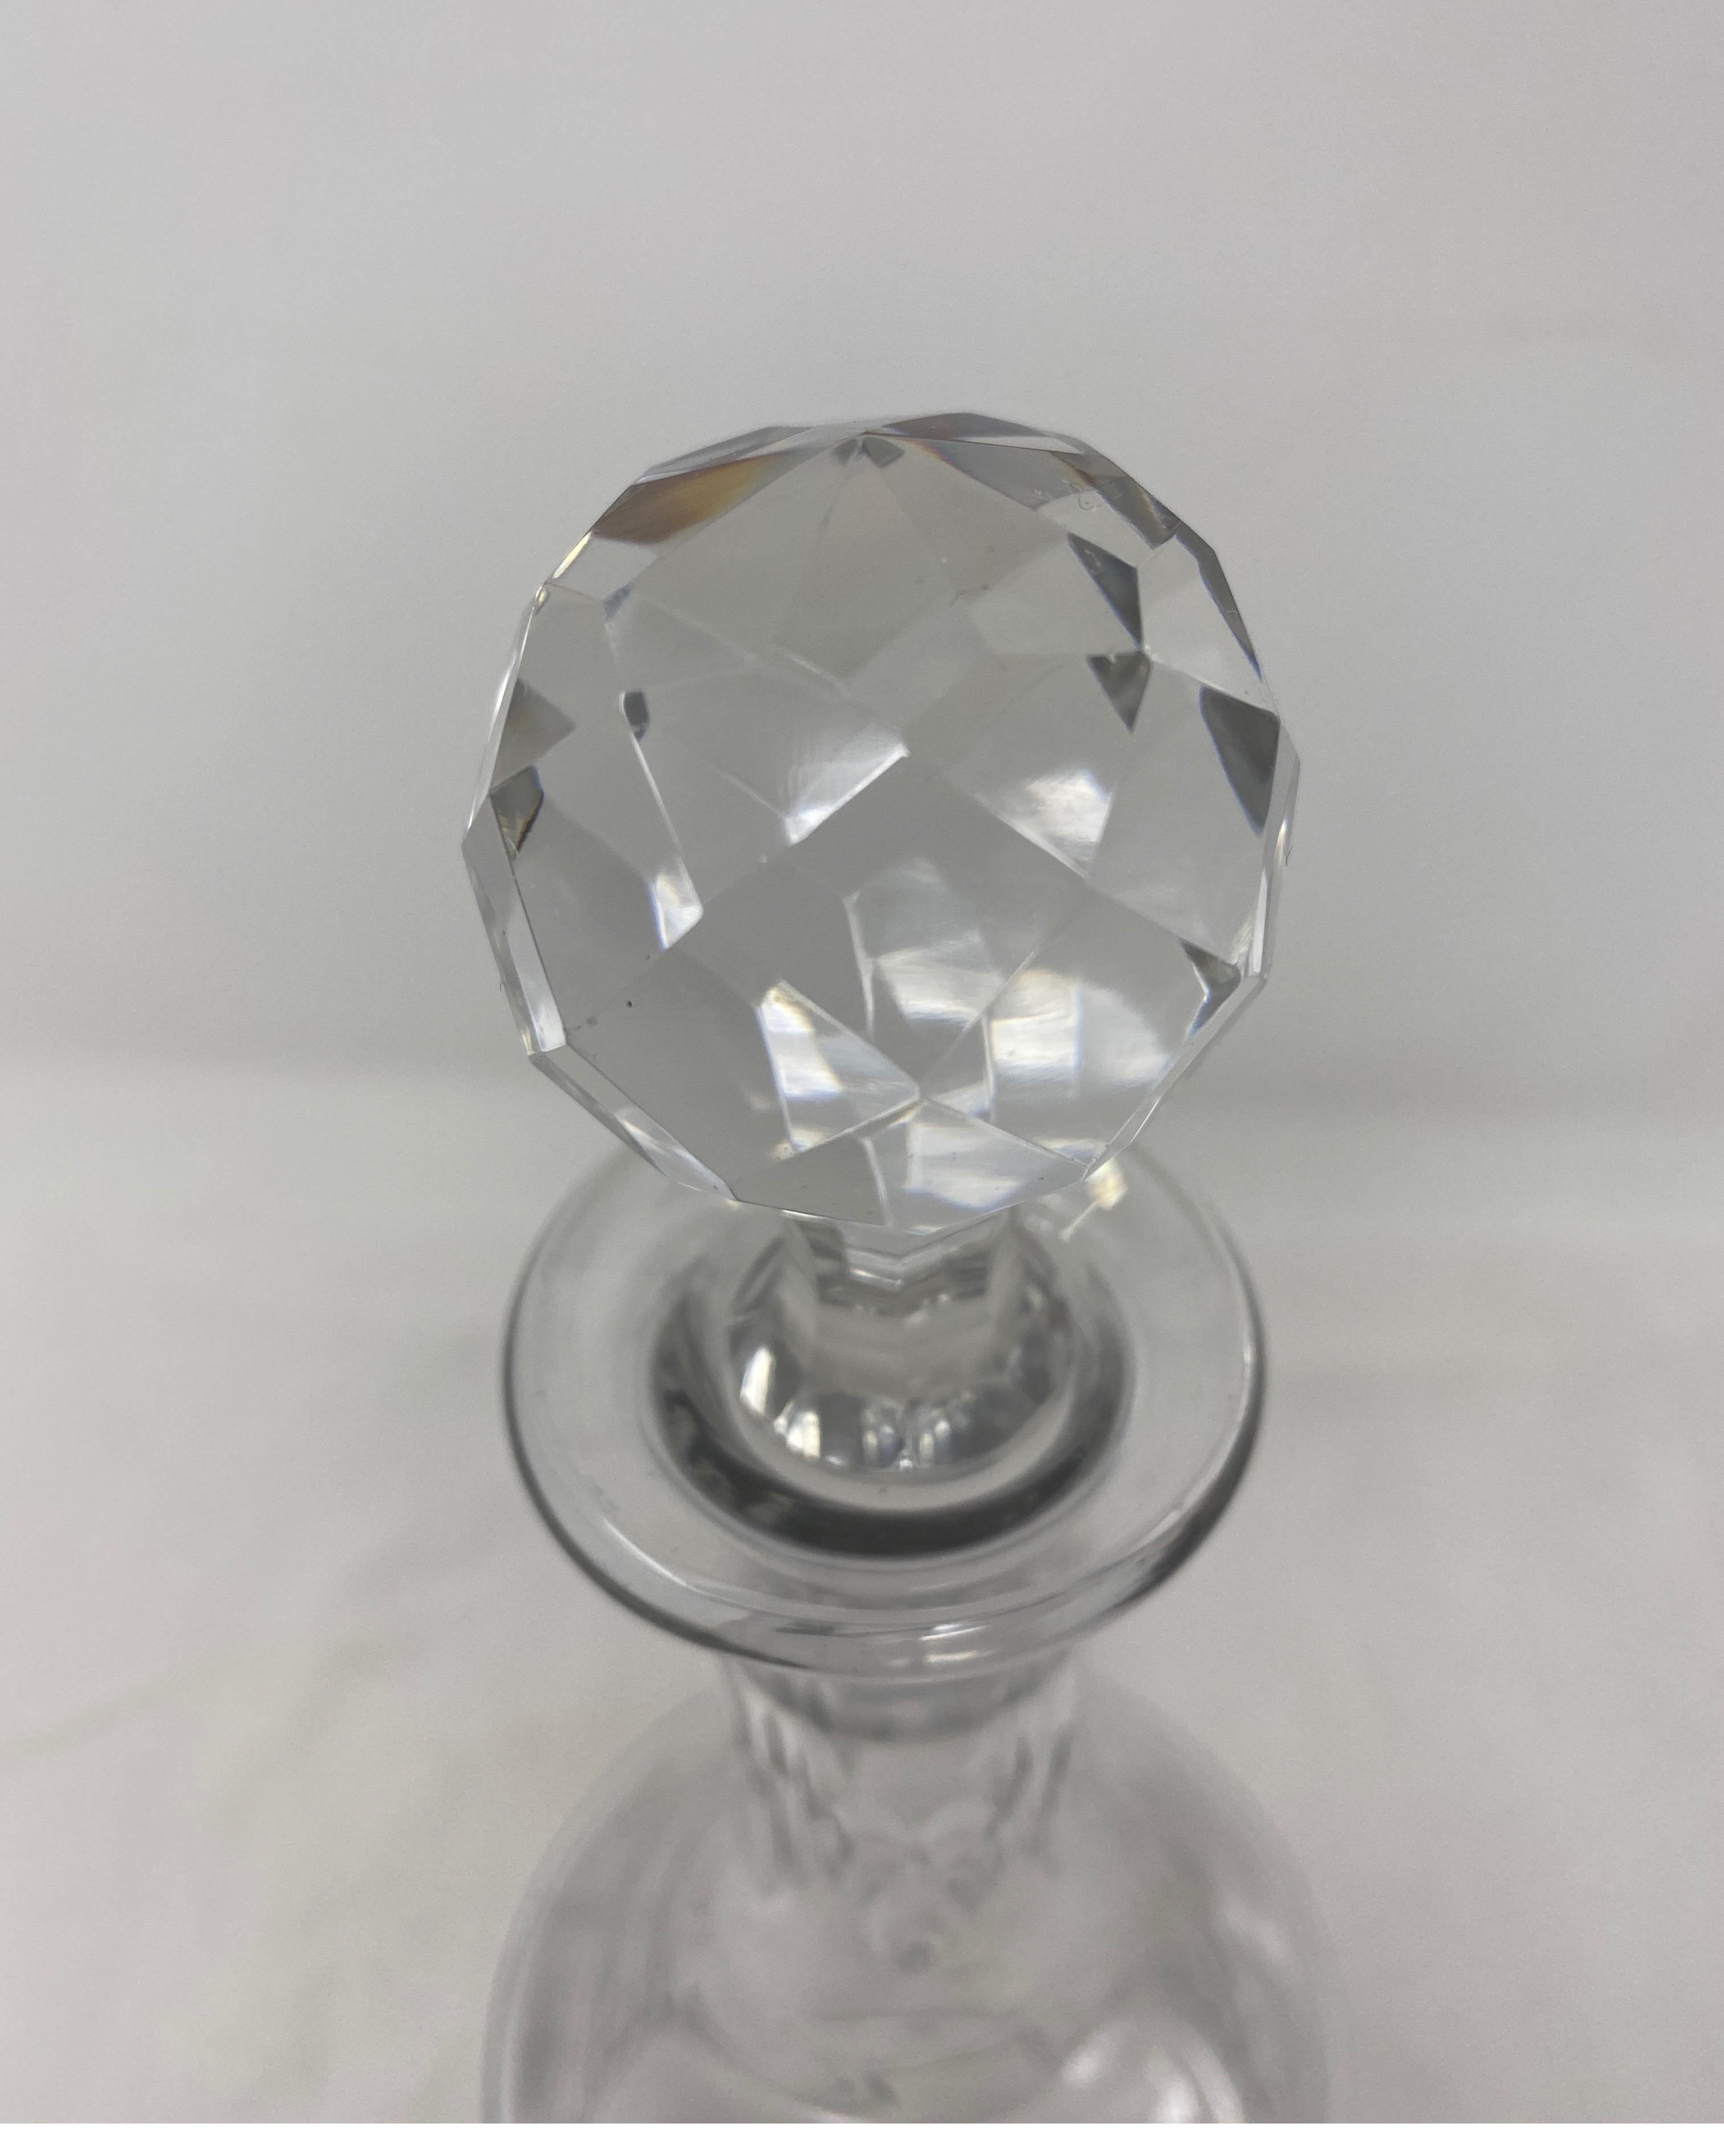 Antique Baccarat crystal decanter with stopper, 19th century.